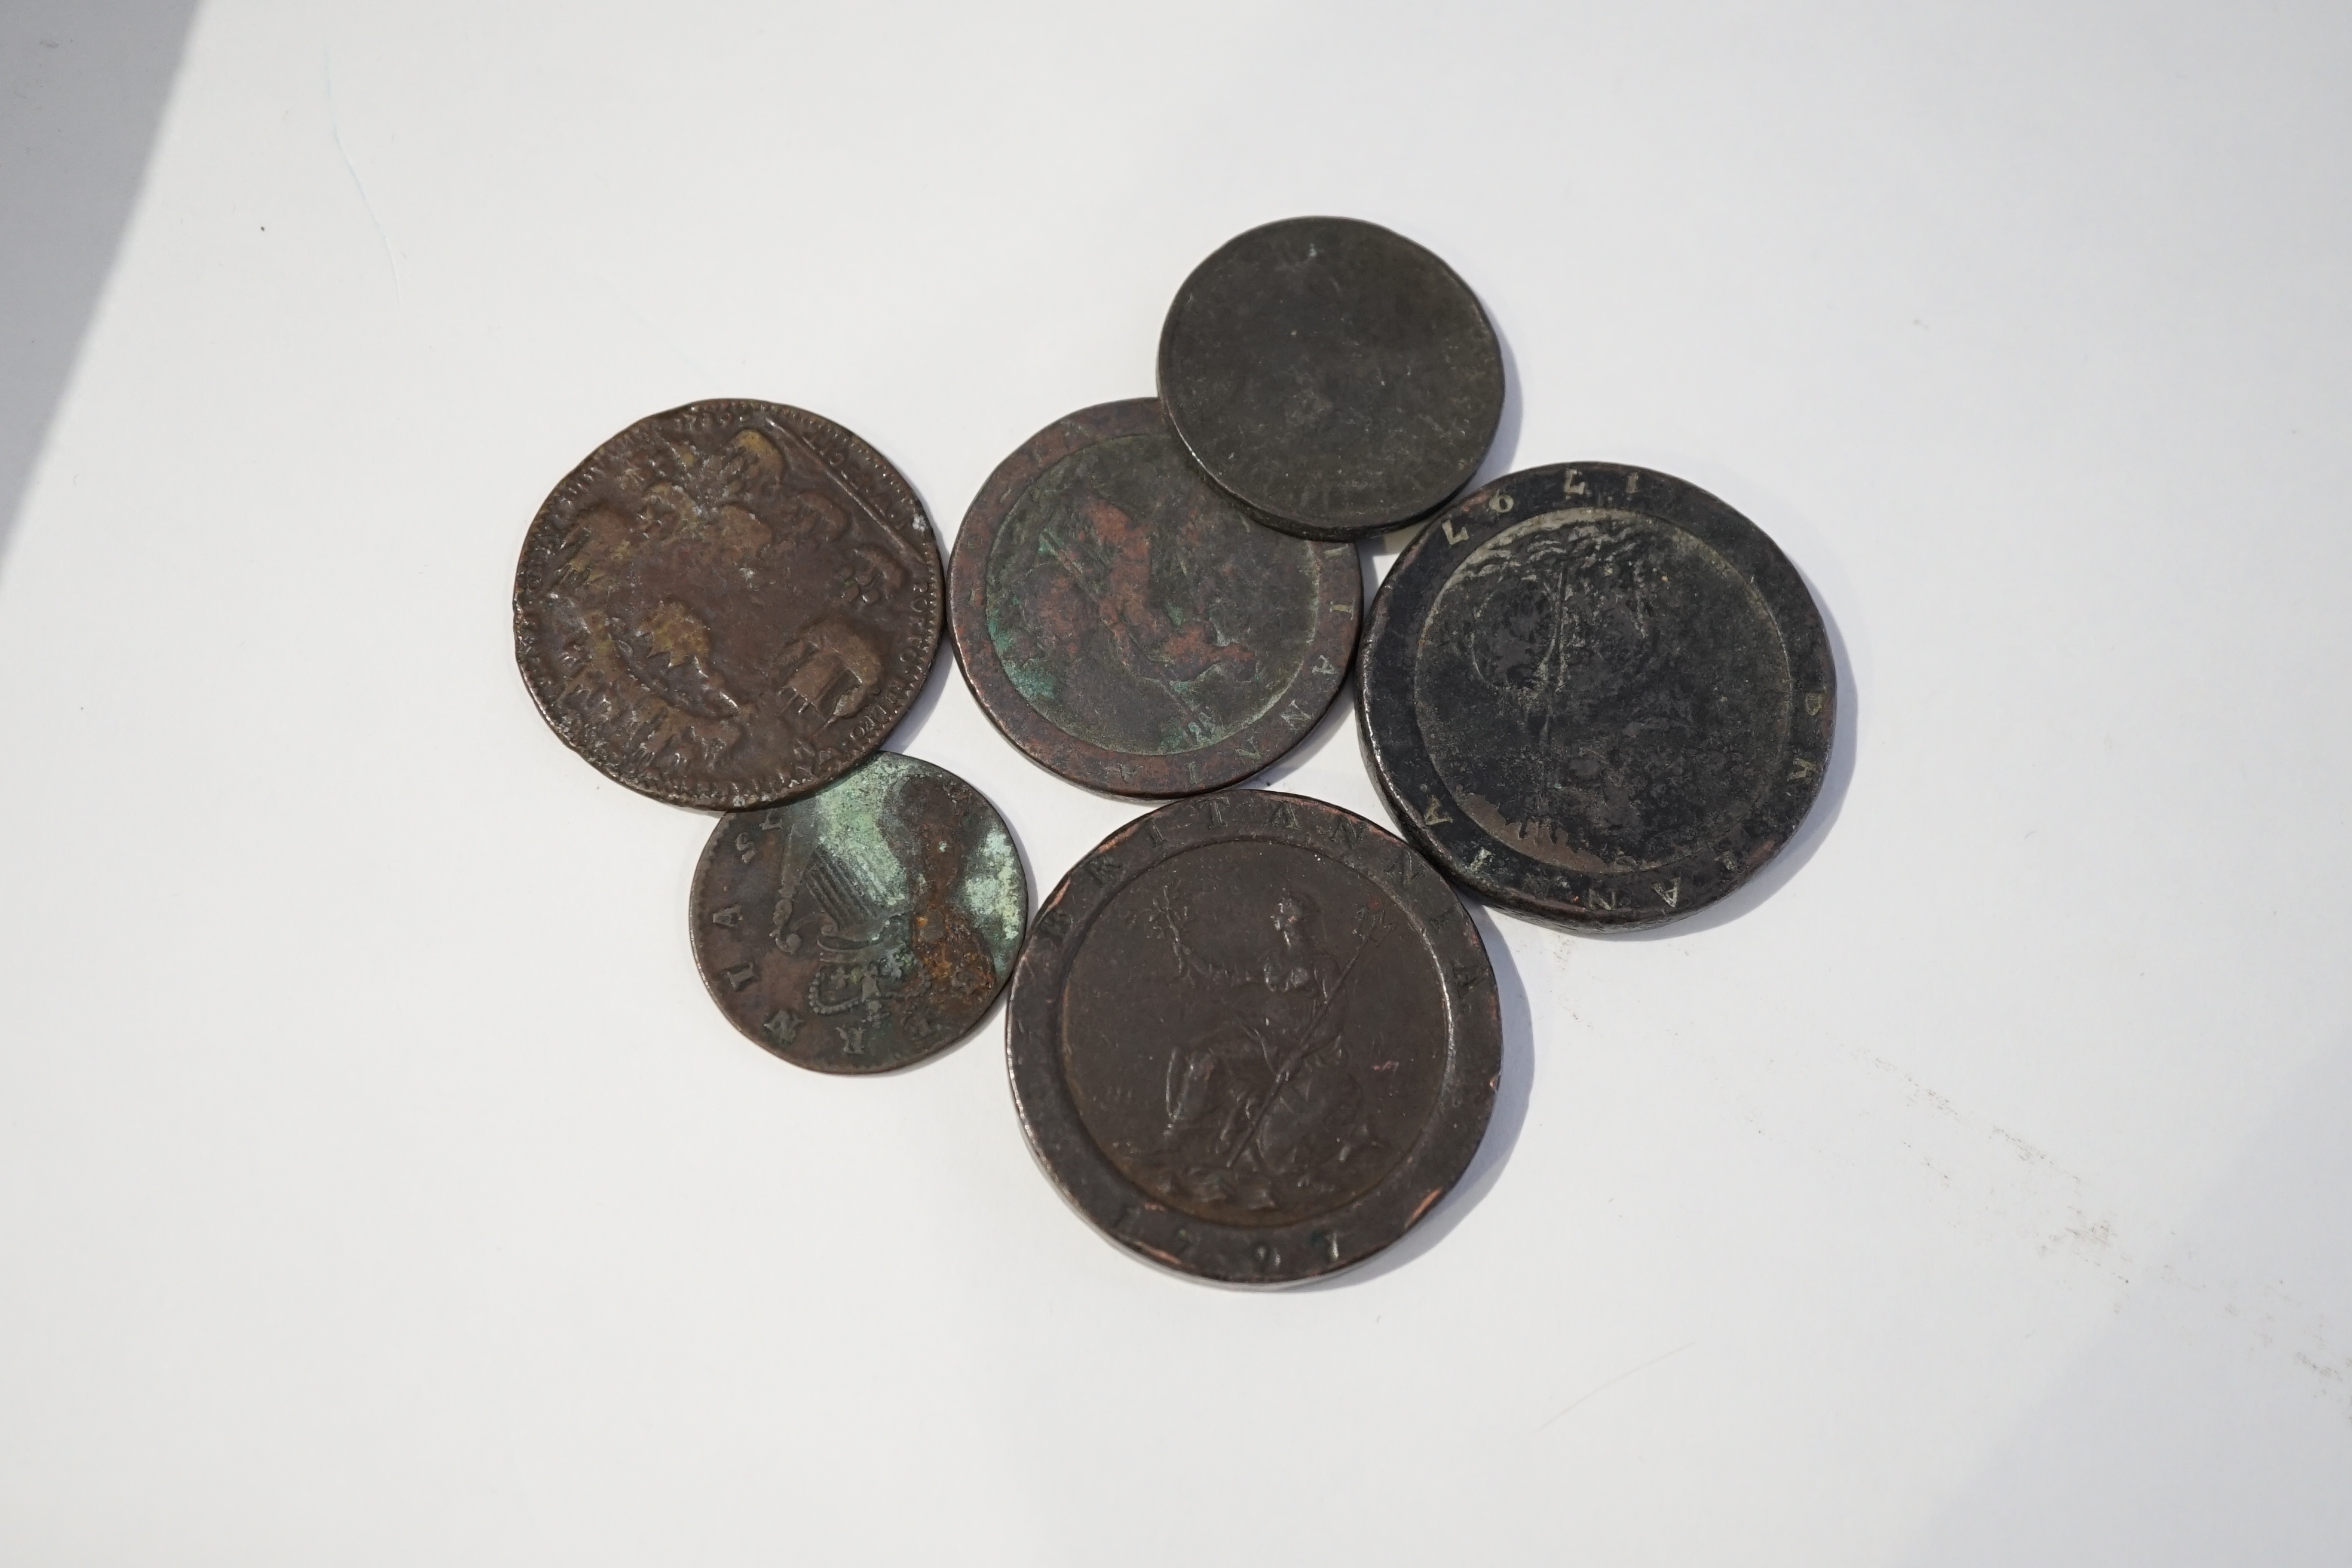 British coins, George III to Elizabeth II, a large quantity of loose coins, including George III copper coins such as 1797 Soho twopence, the majority pre-decimal ranging from two shillings to pennies including pre 1947